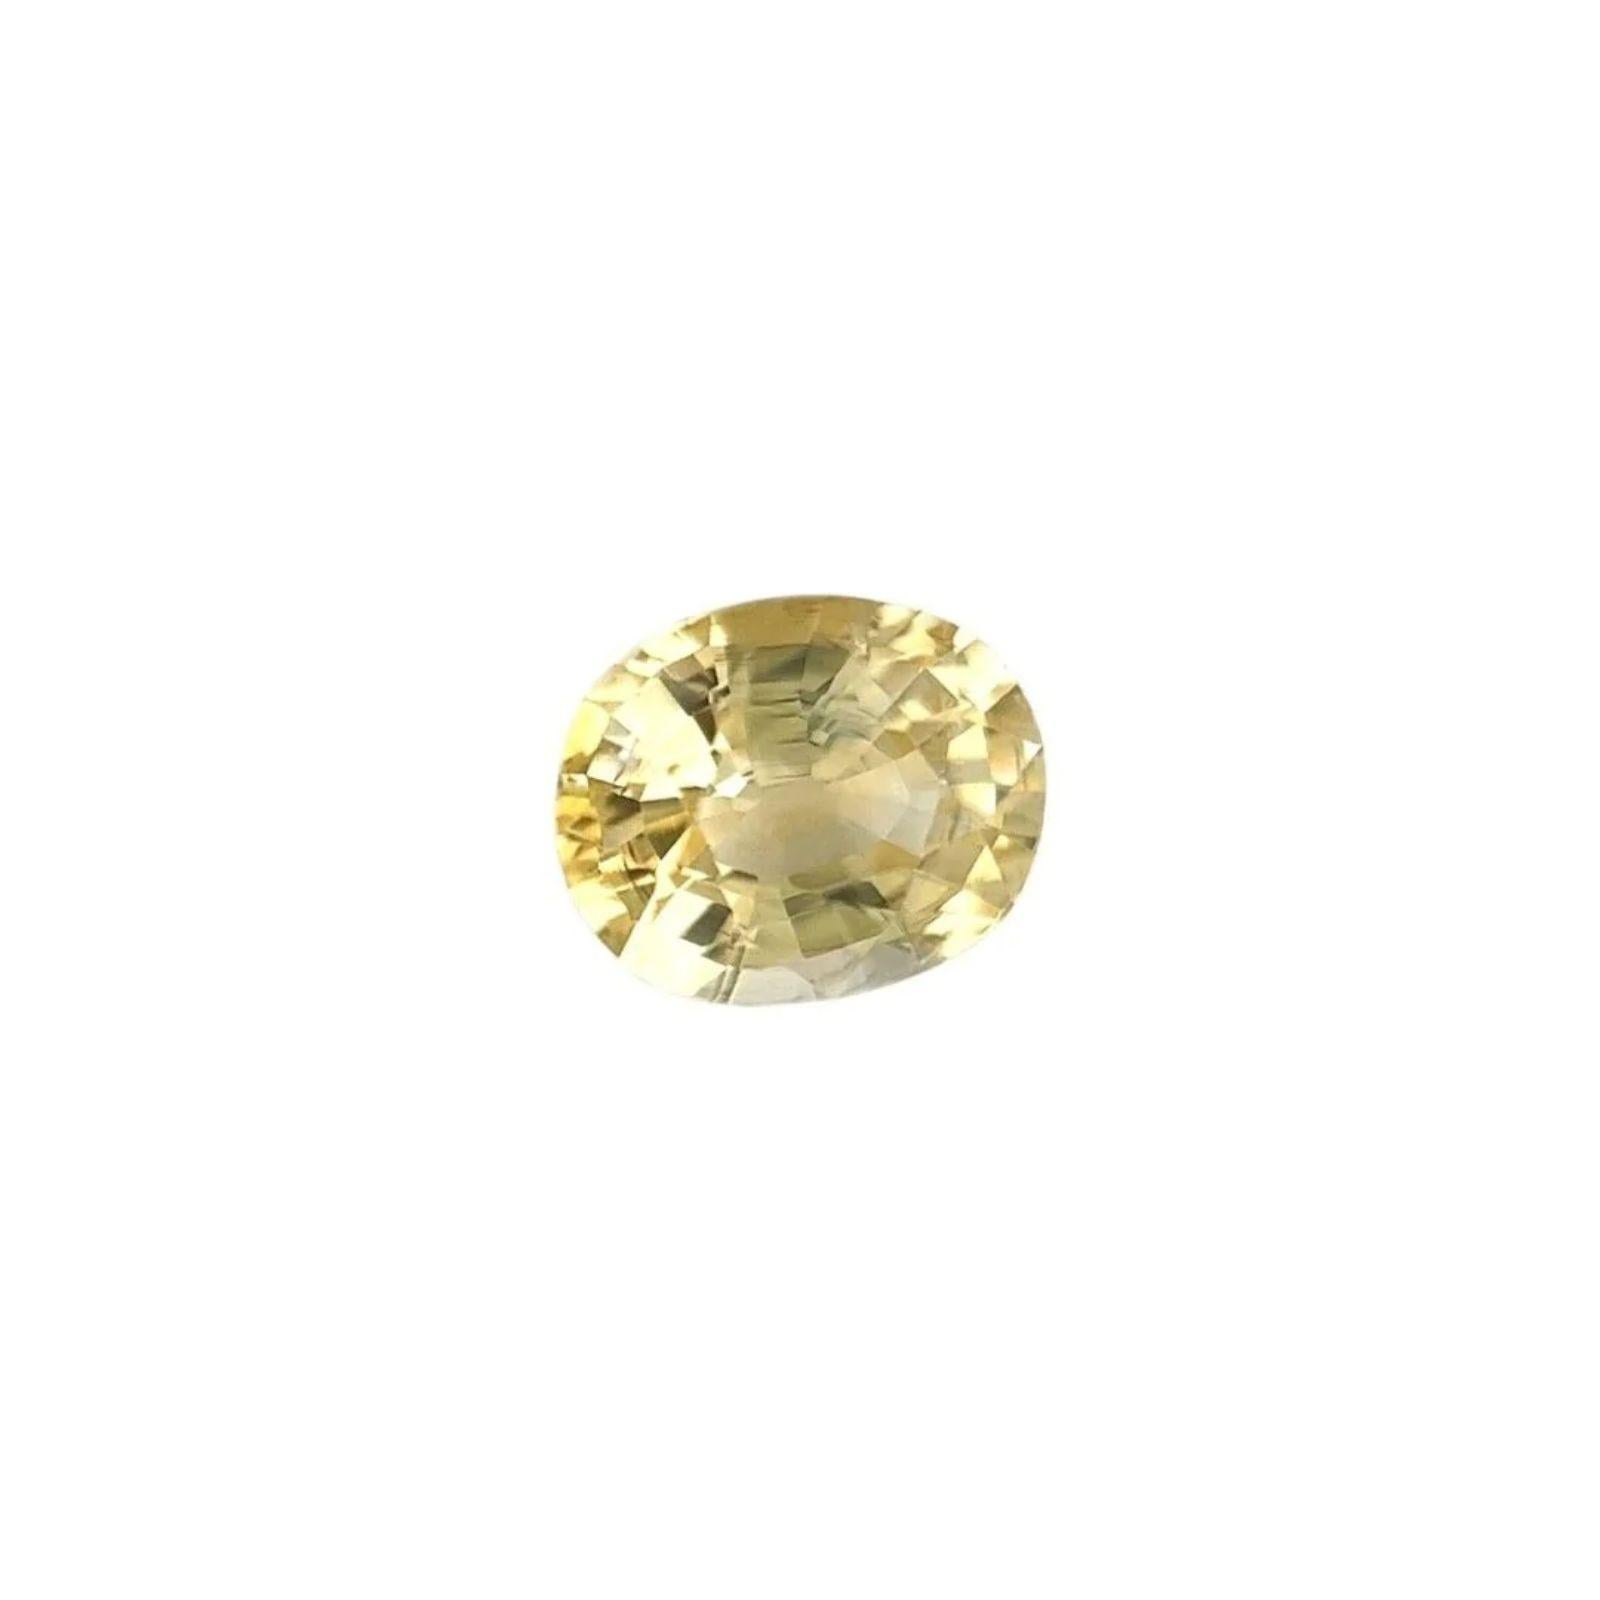 0.68ct Vivid Yellow Ceylon Sapphire Oval Cut Loose Gemstone 5.6x4.6mm

Natural Vivid Yellow Ceylon Sapphire Gemstone.
0.68 Carat with a beautiful vivid yellow colour and an excellent oval cut. Also has excellent clarity, very clean stone.
Standard